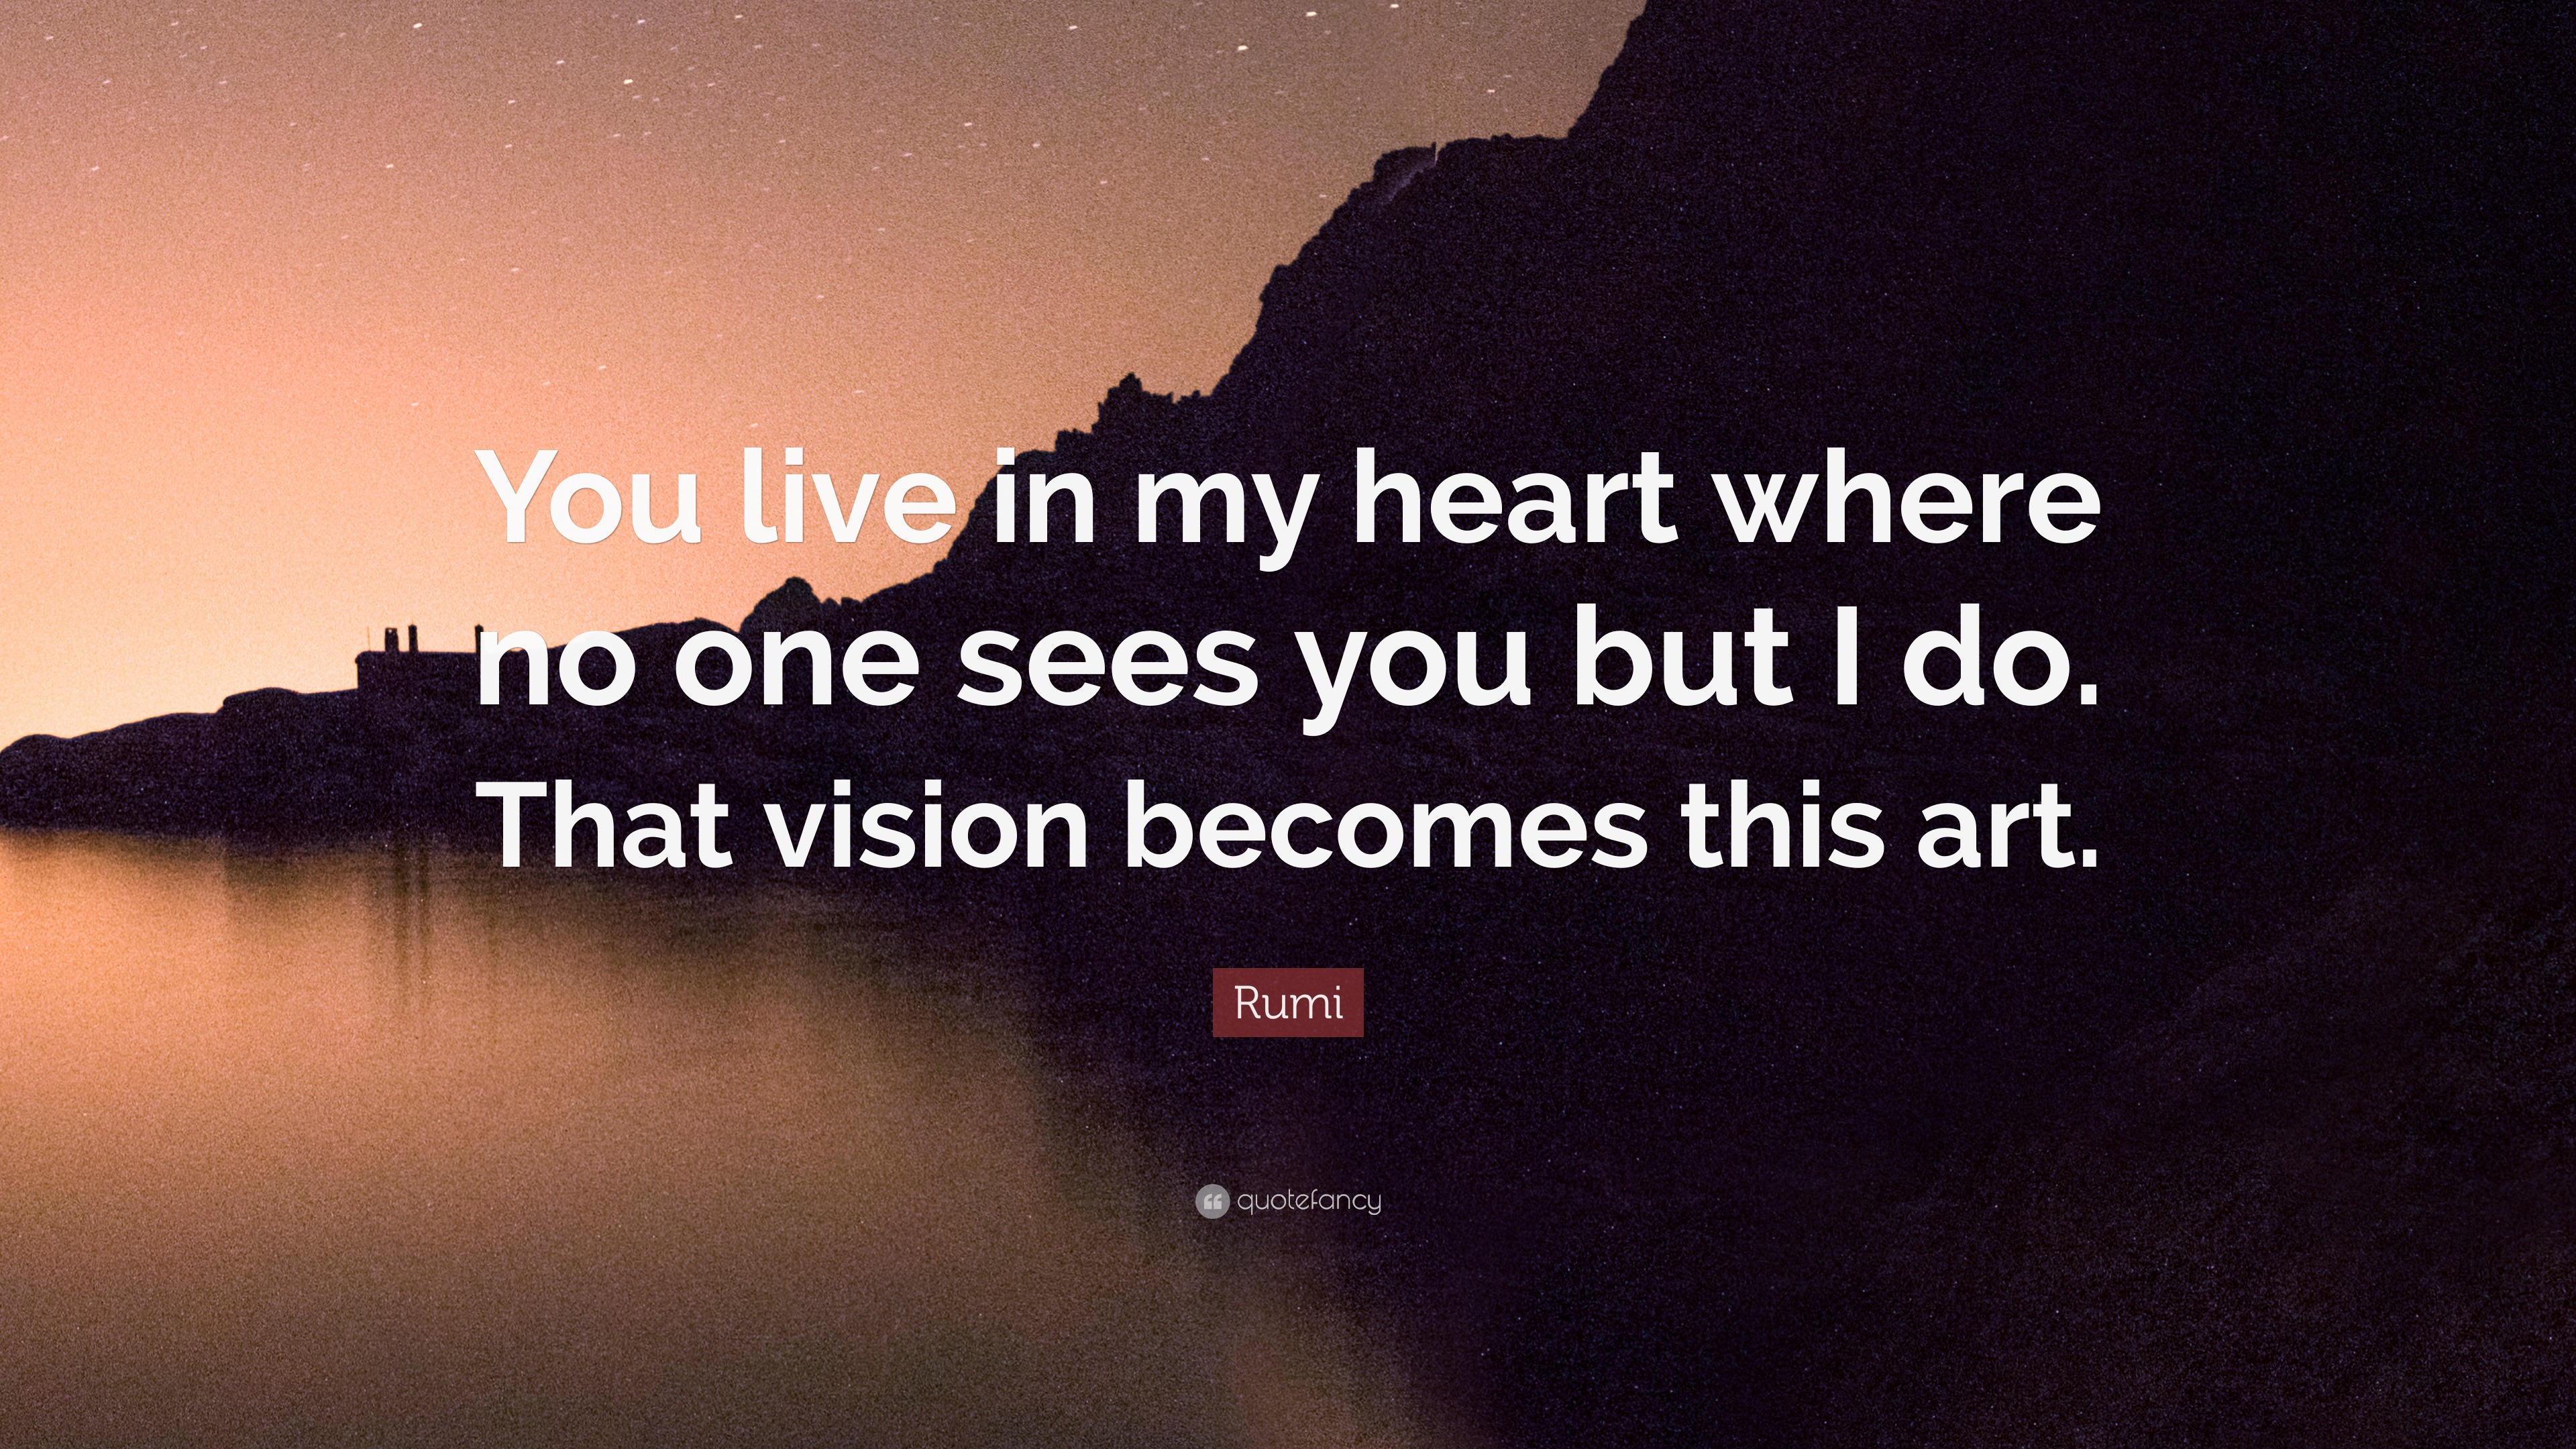 Rumi Quote: “You Live In My Heart Where No One Sees You But I Do. That